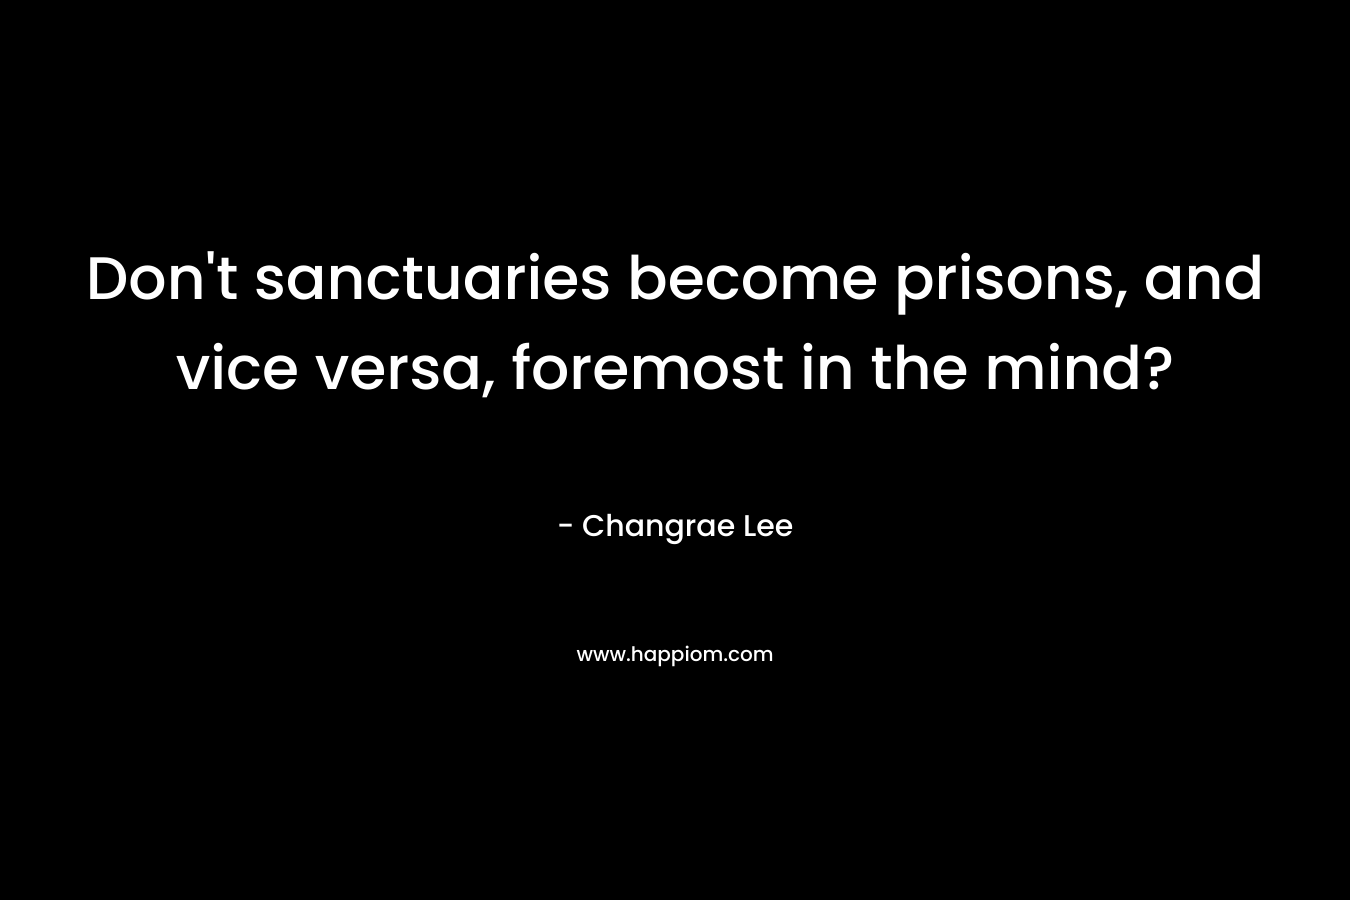 Don't sanctuaries become prisons, and vice versa, foremost in the mind?